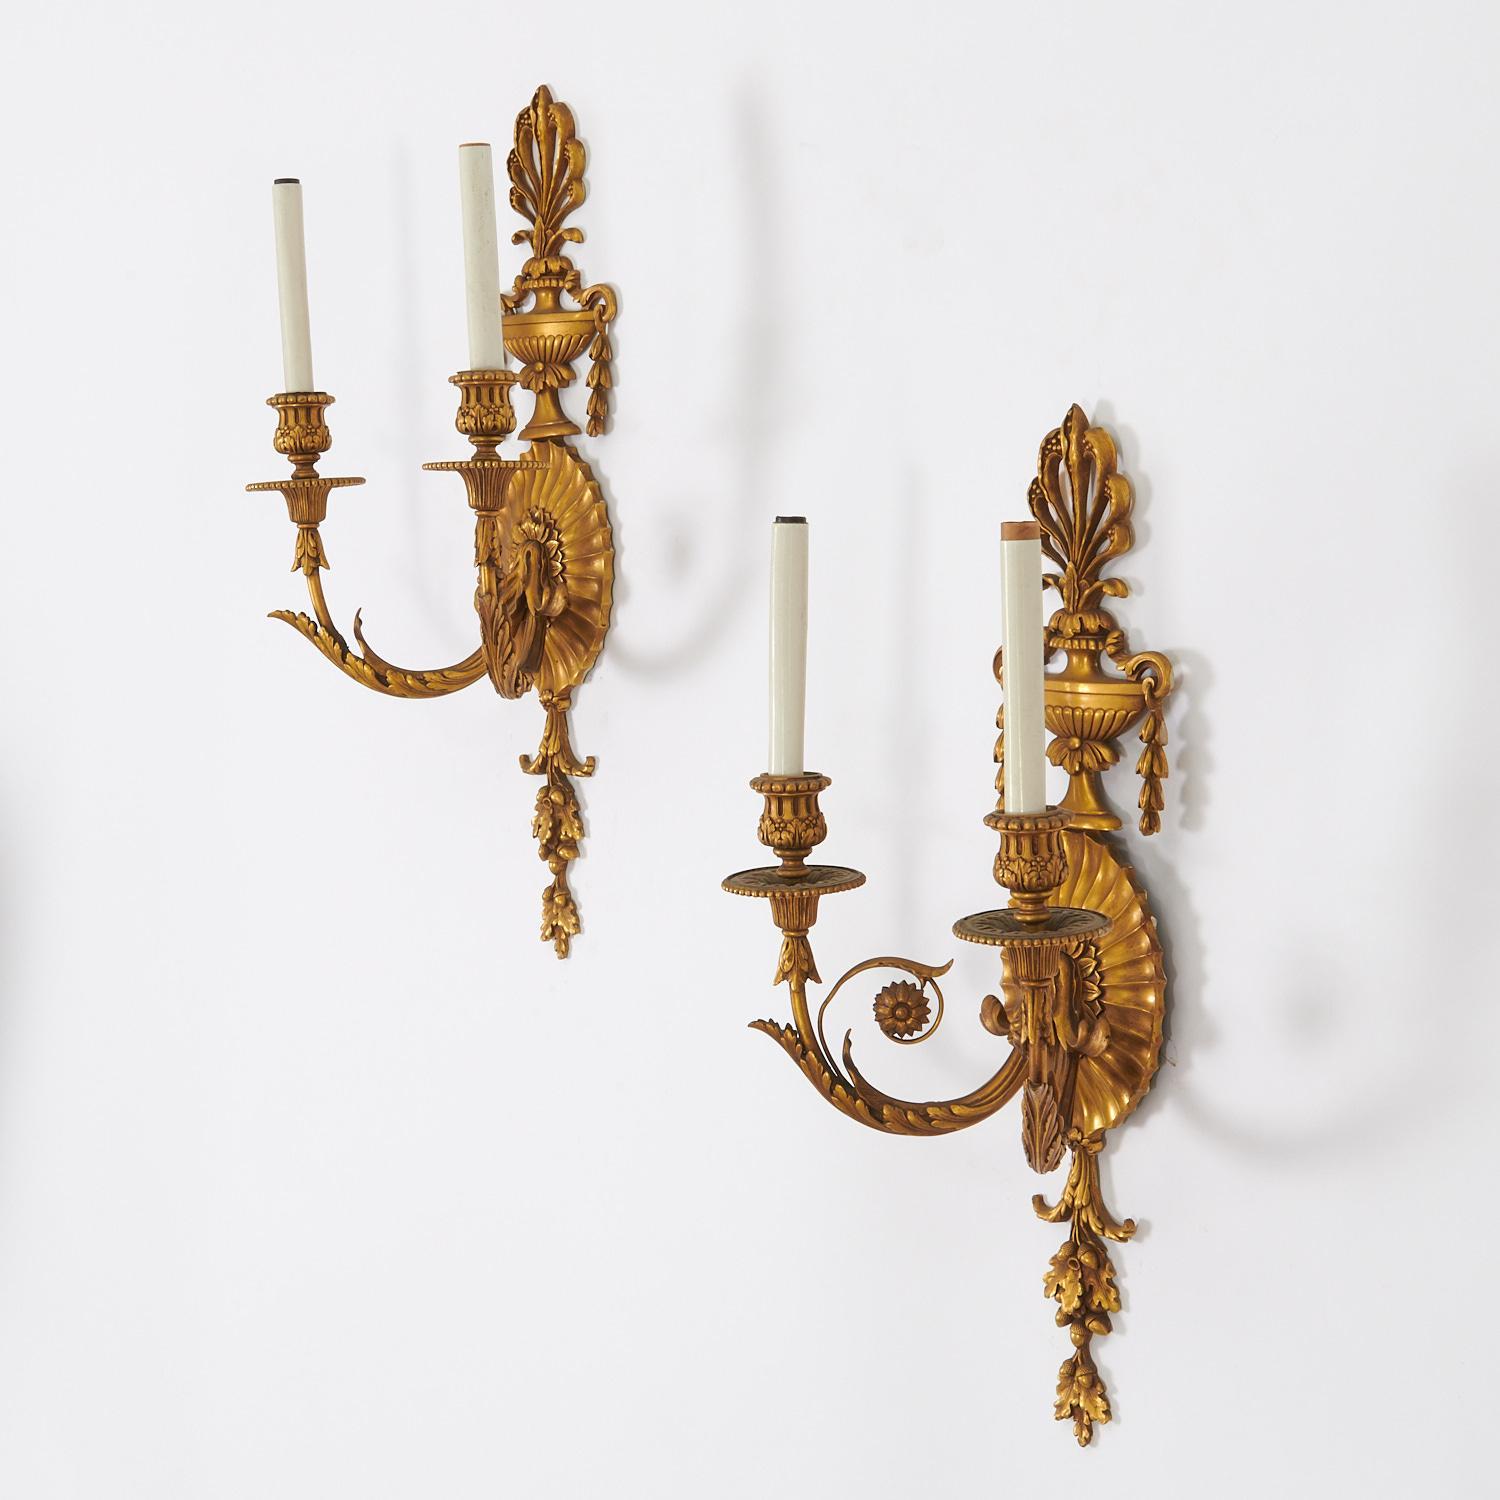 An elegant pair of George III style gilt bronze wall light sconces
Each sconce with two arms issuing from a channeled oval backplate topped with an urn and plume finial, impressed manufacturer mark on reverse,

Maker: Edward F. Caldwell Co.